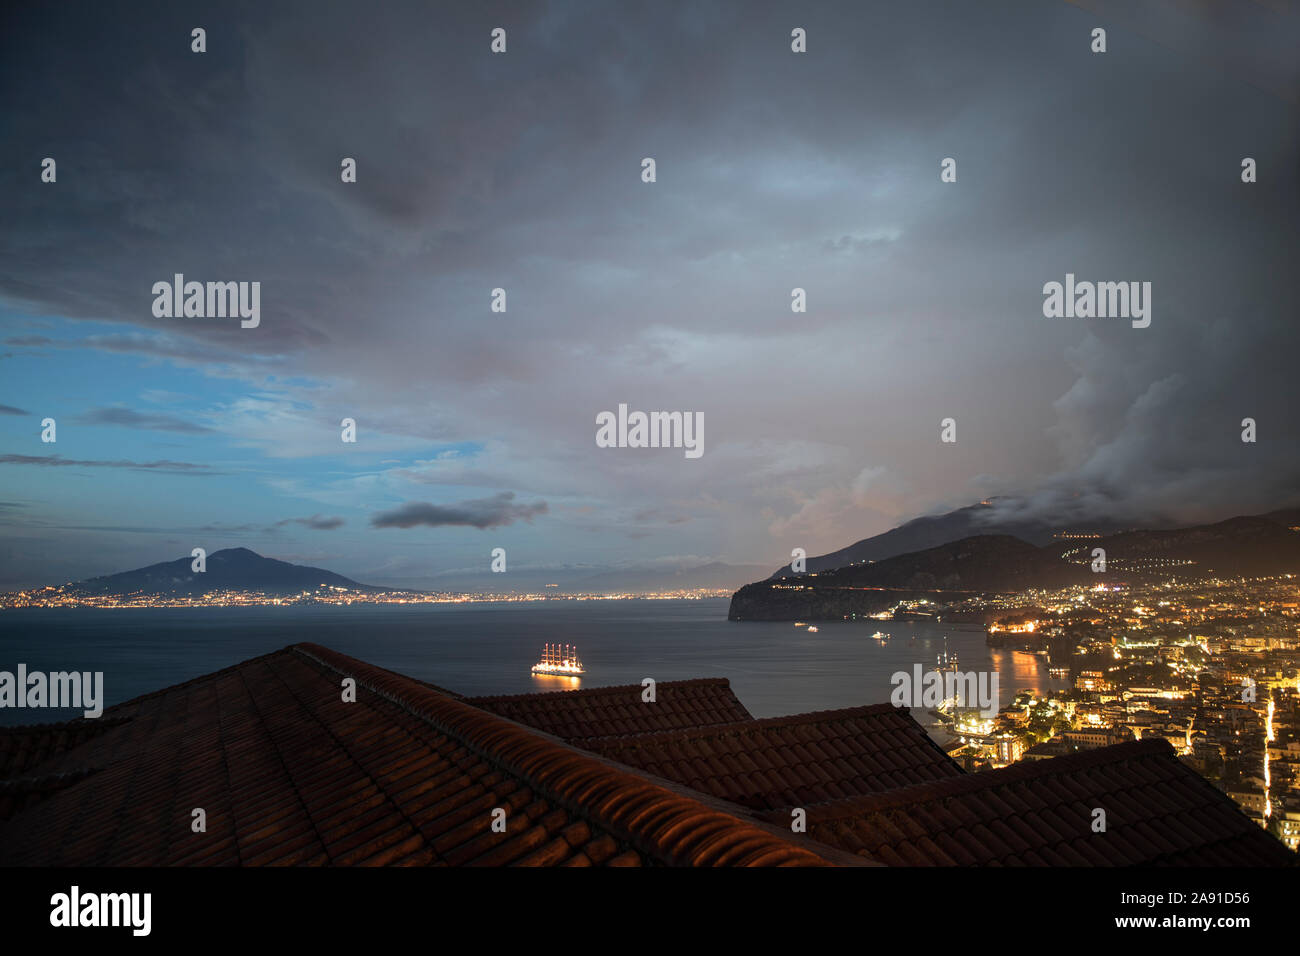 Sheet Lightning over roof tops in Sorrento, the Bay of Naples and mount Vesuvius in evening light, Italy. Stock Photo